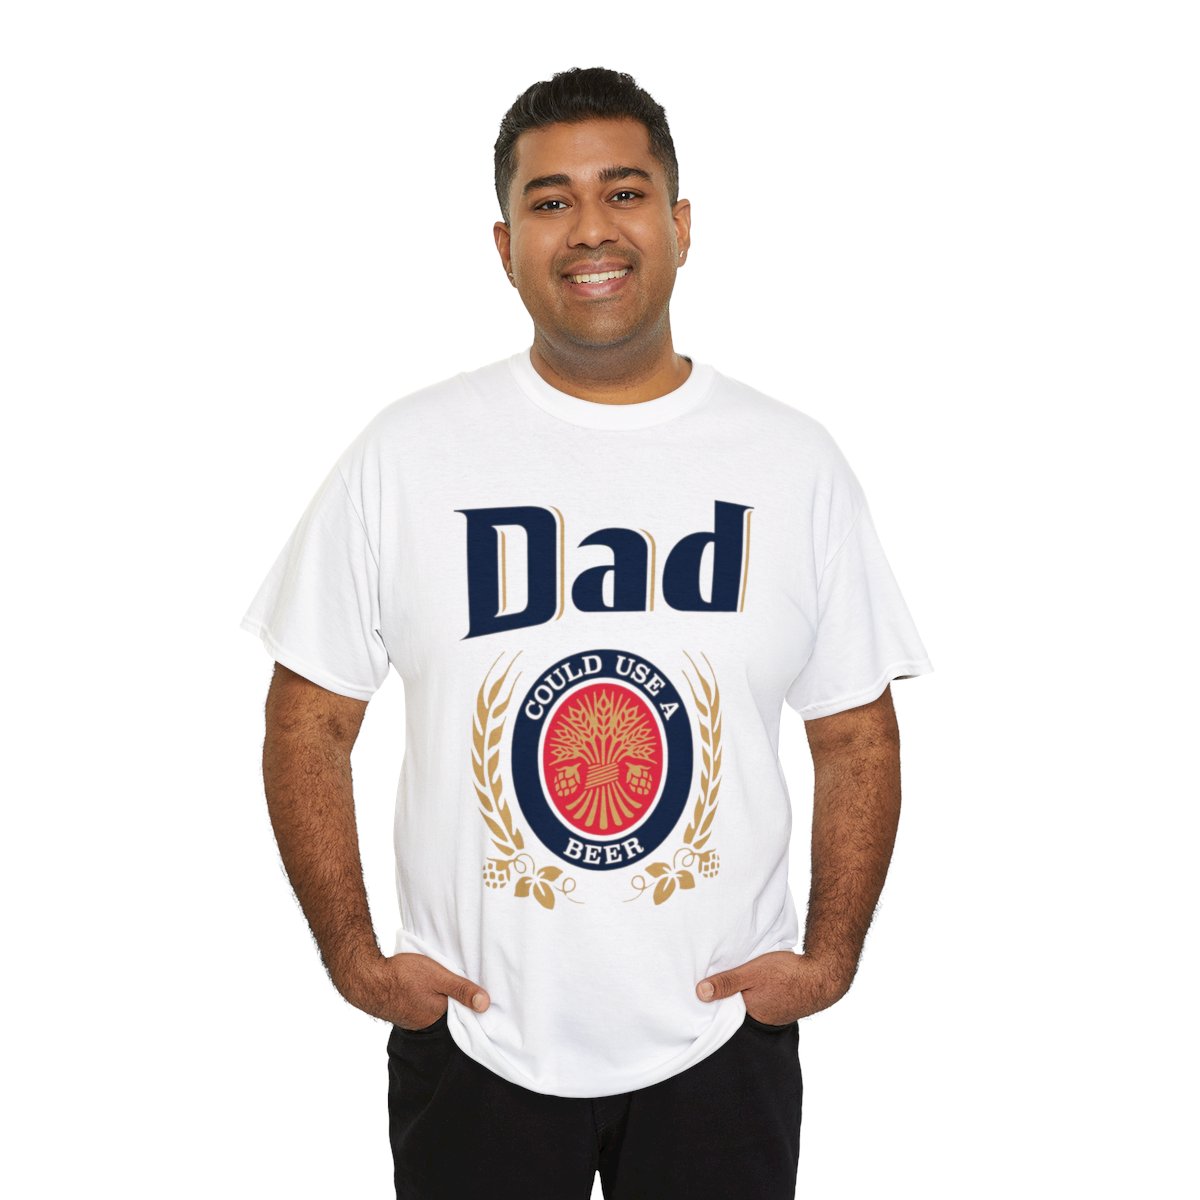 Dad Could Use a Beer - Unisex Heavy Cotton Tee